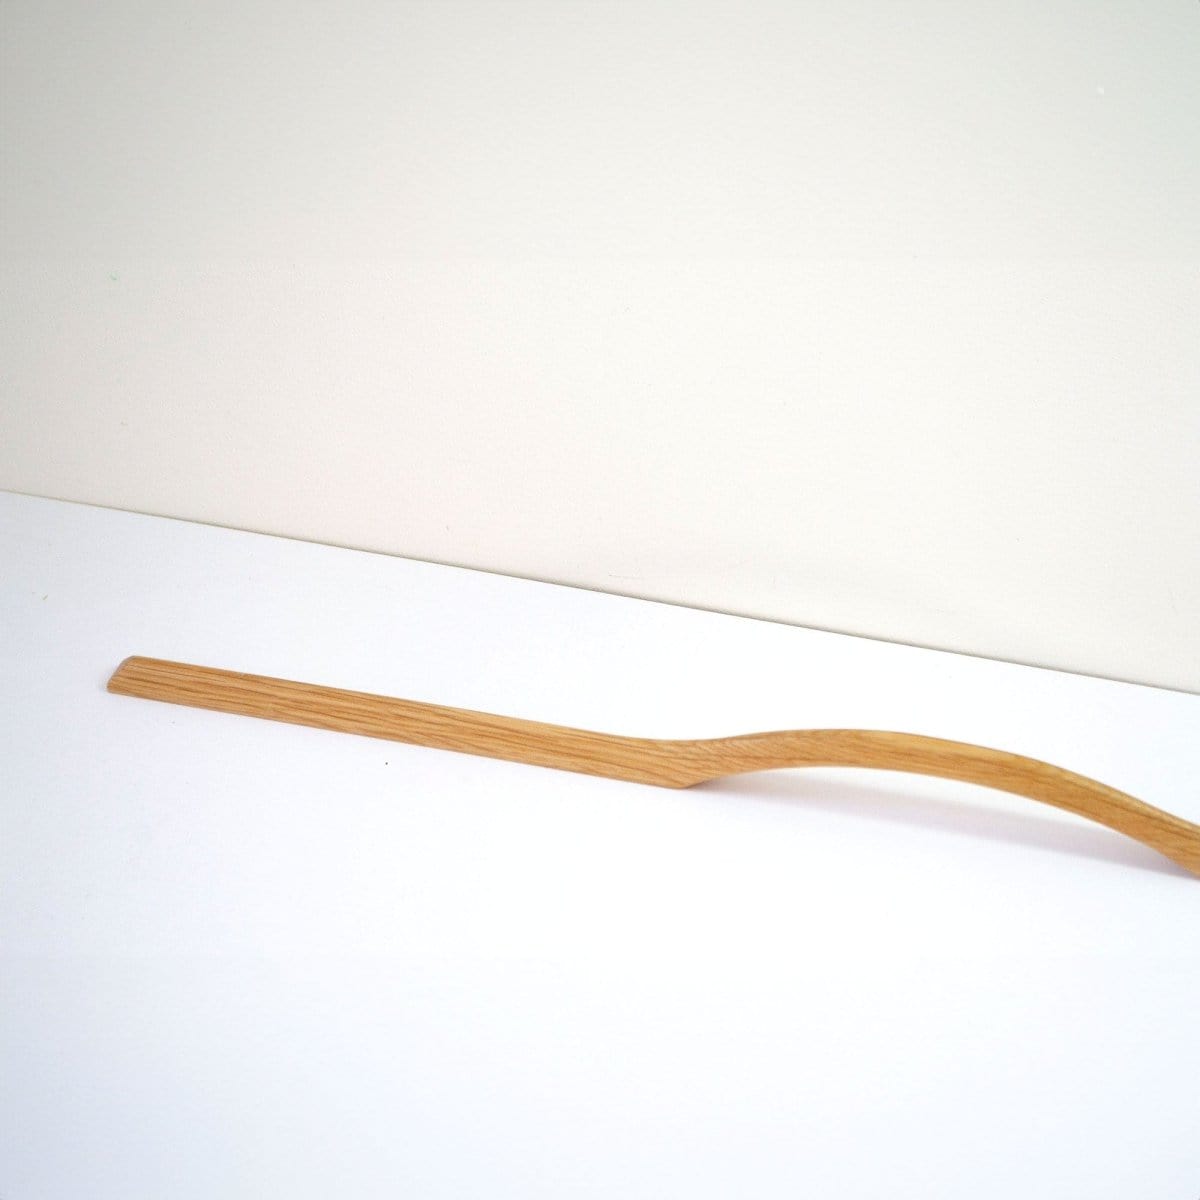 Curved Oak Handles, Wooden handle for wardrobe or drawers